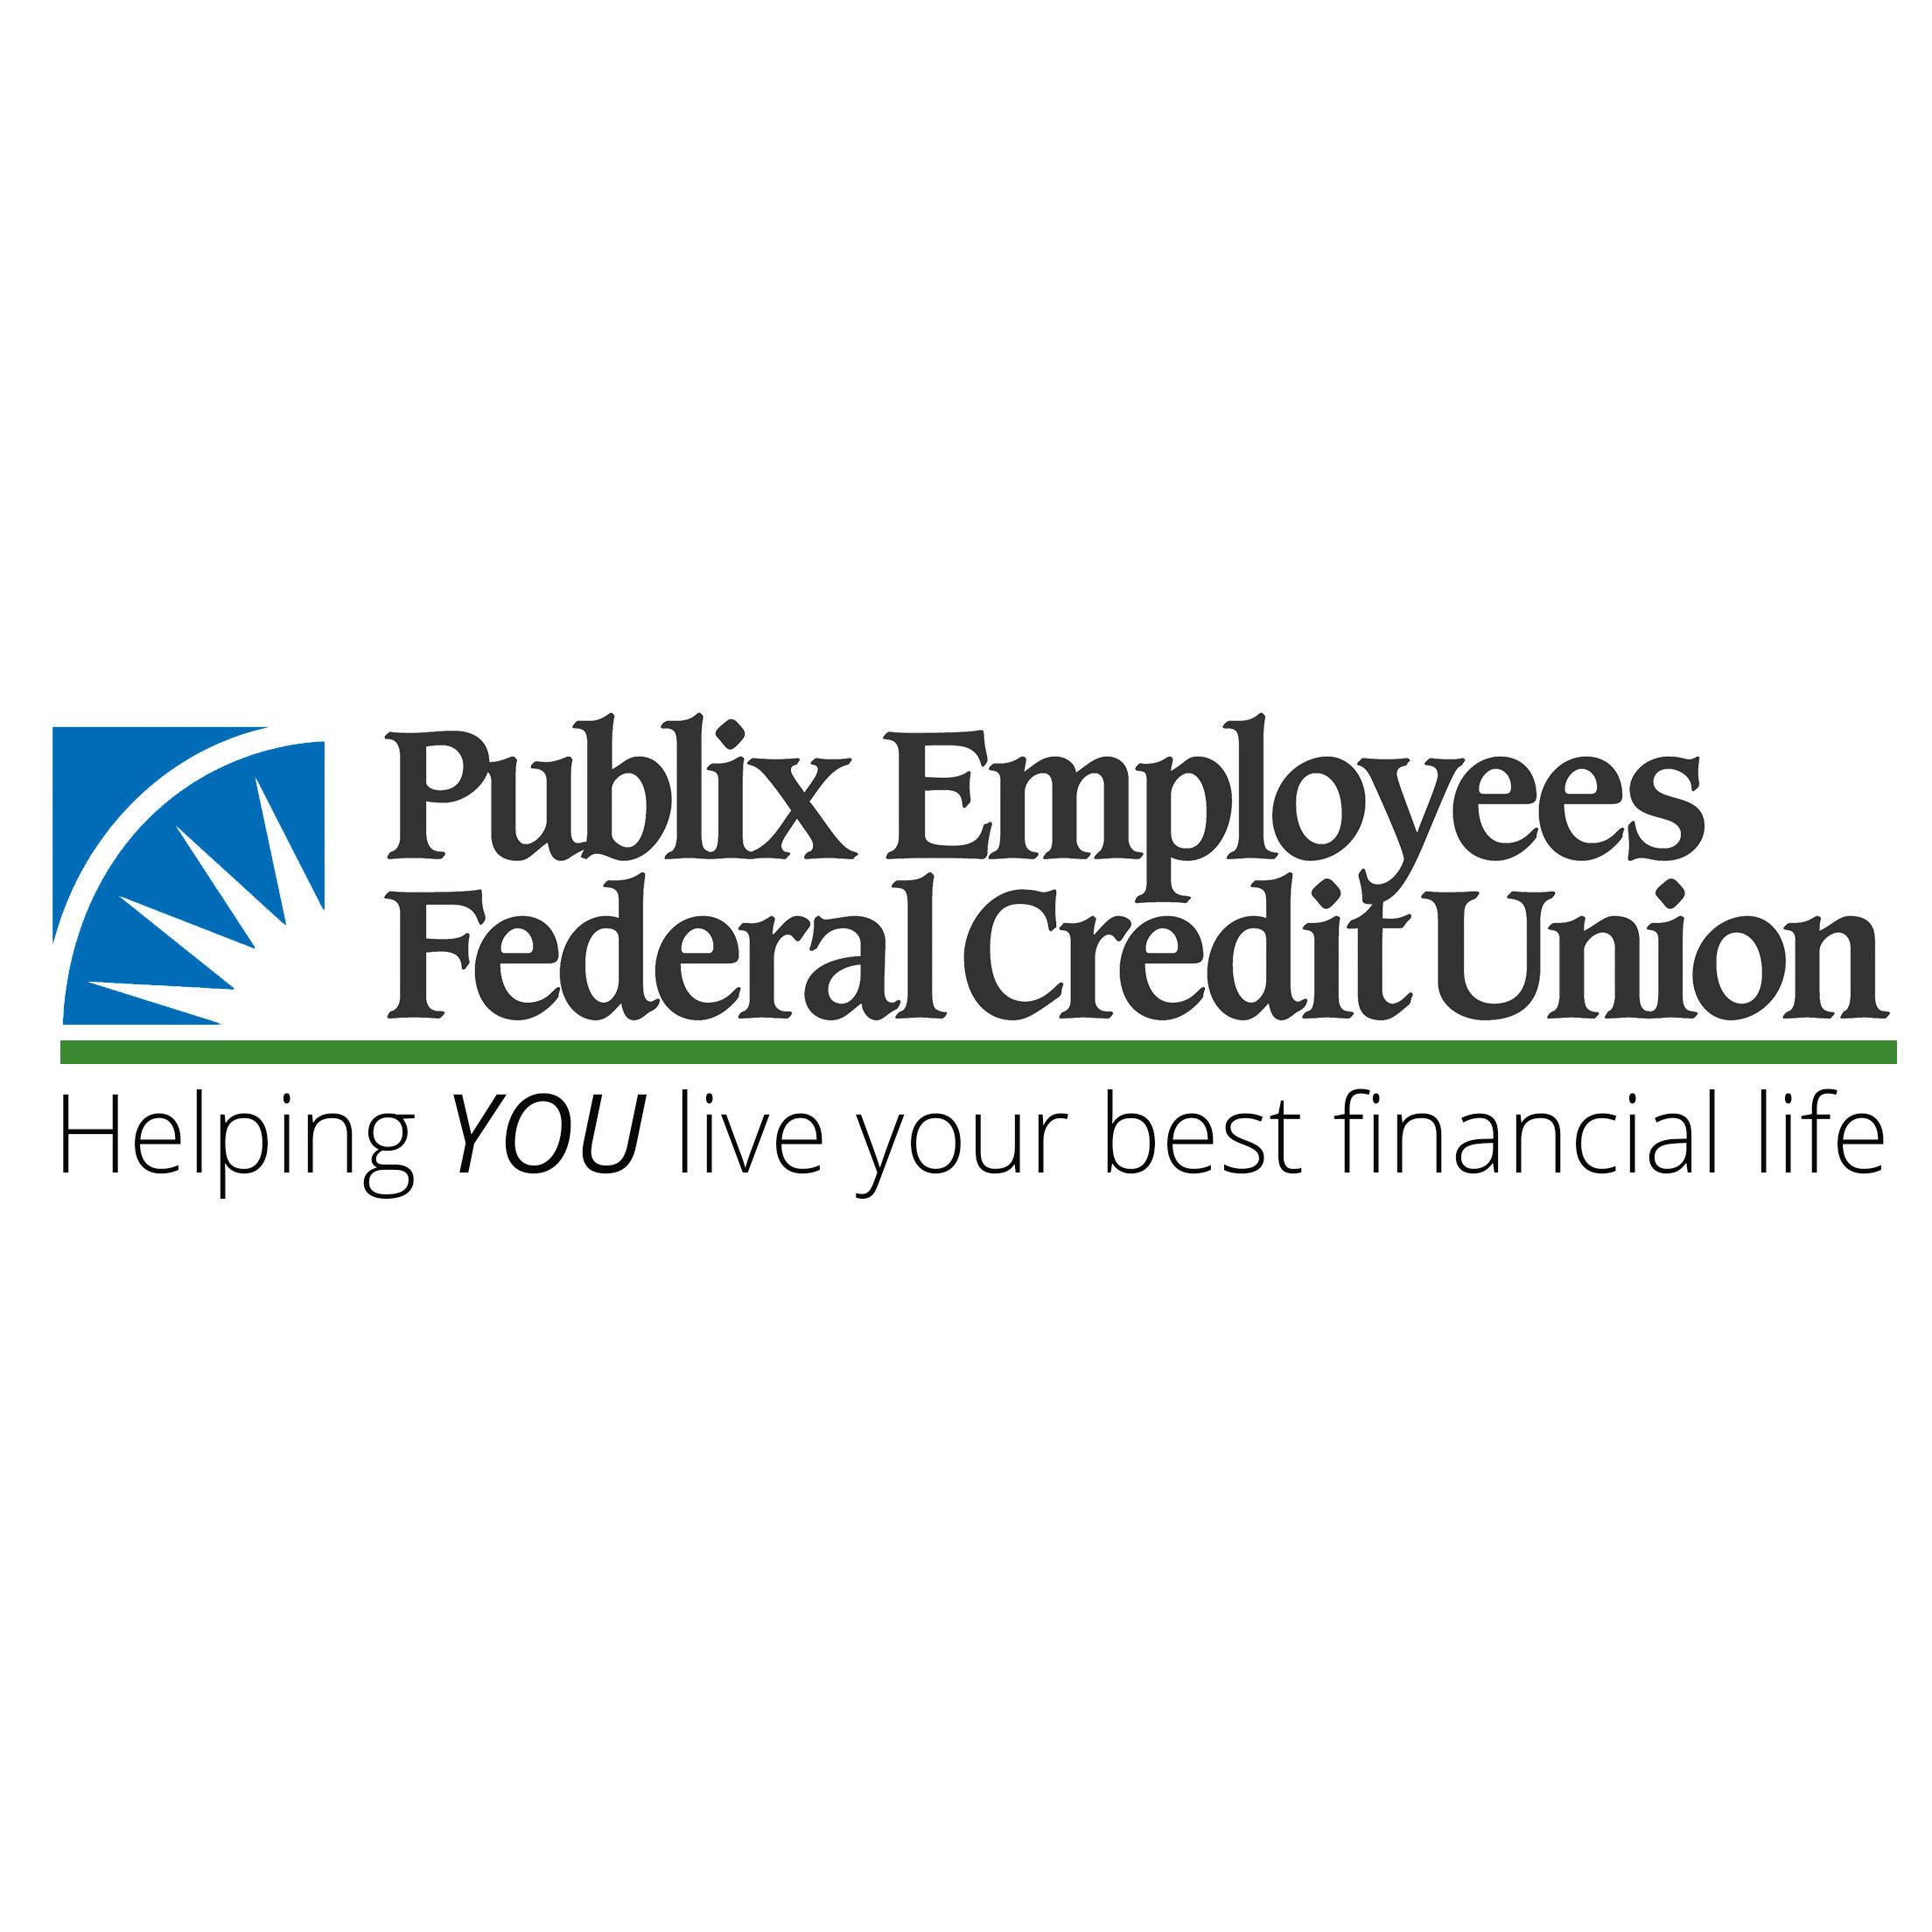 Credit Card Publix - Learn How to Order a Publix Employees Federal Credit Union Card